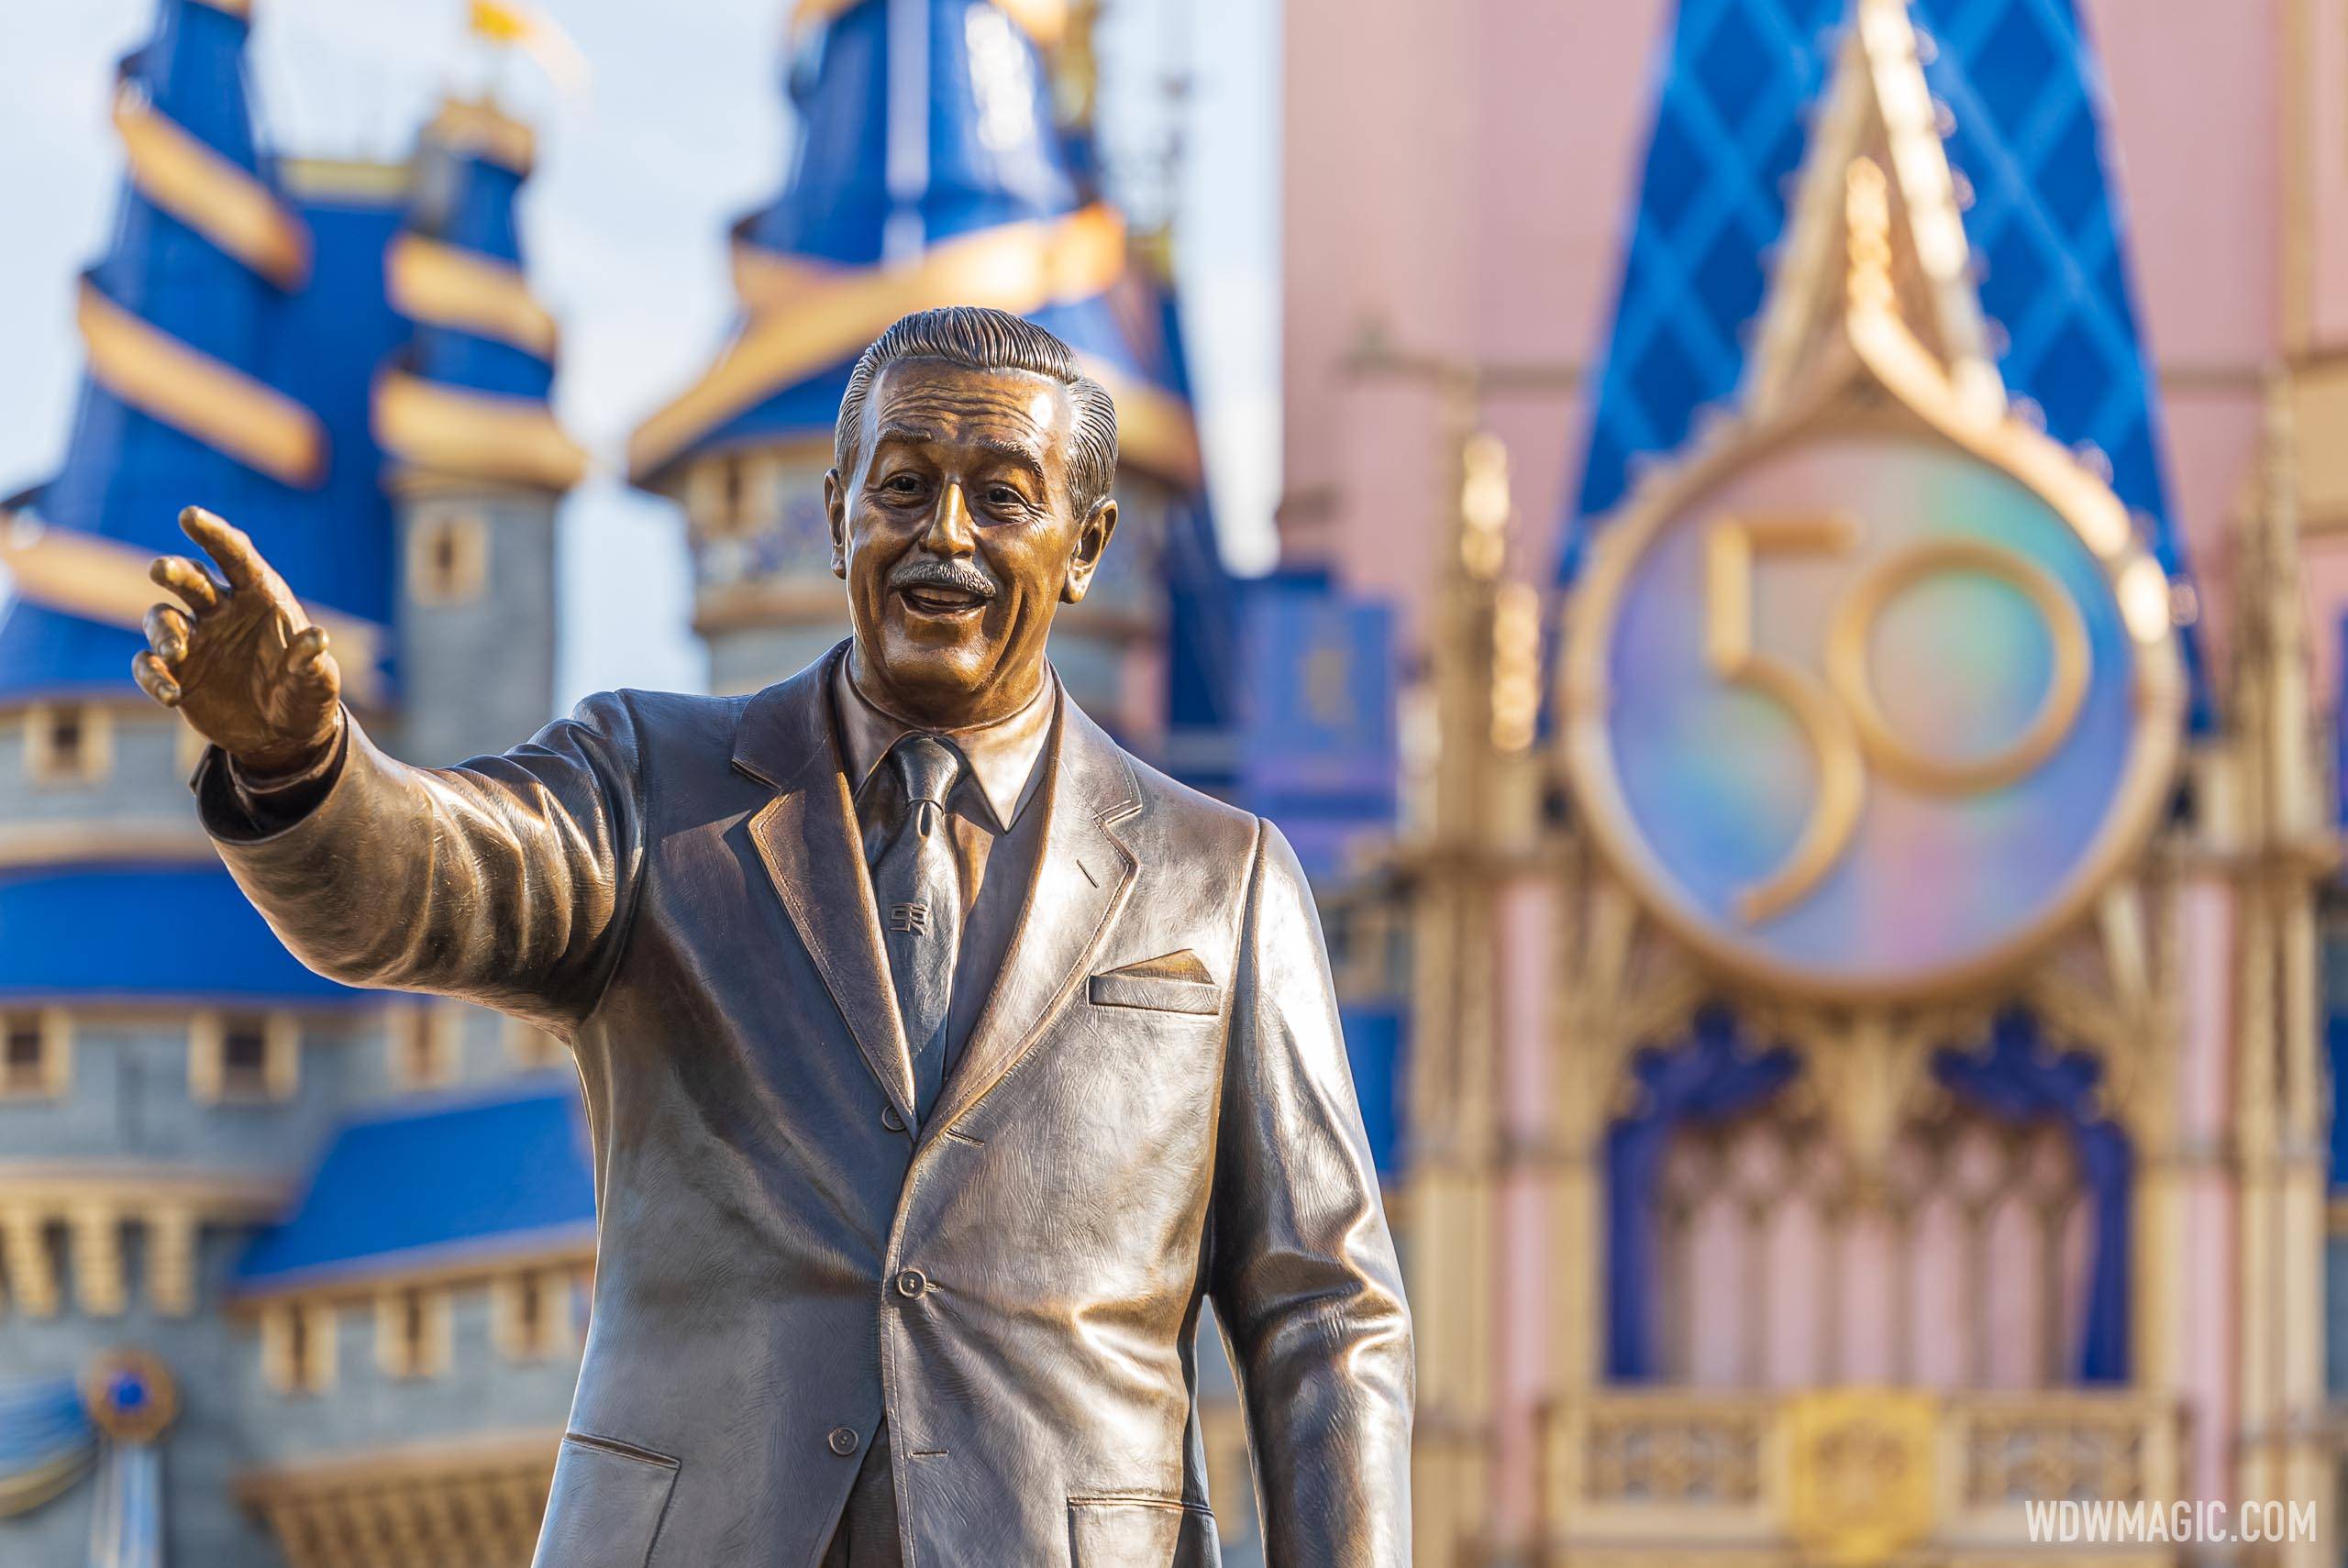 The service celebrations were original planned for early 2022 at Magic Kingdom